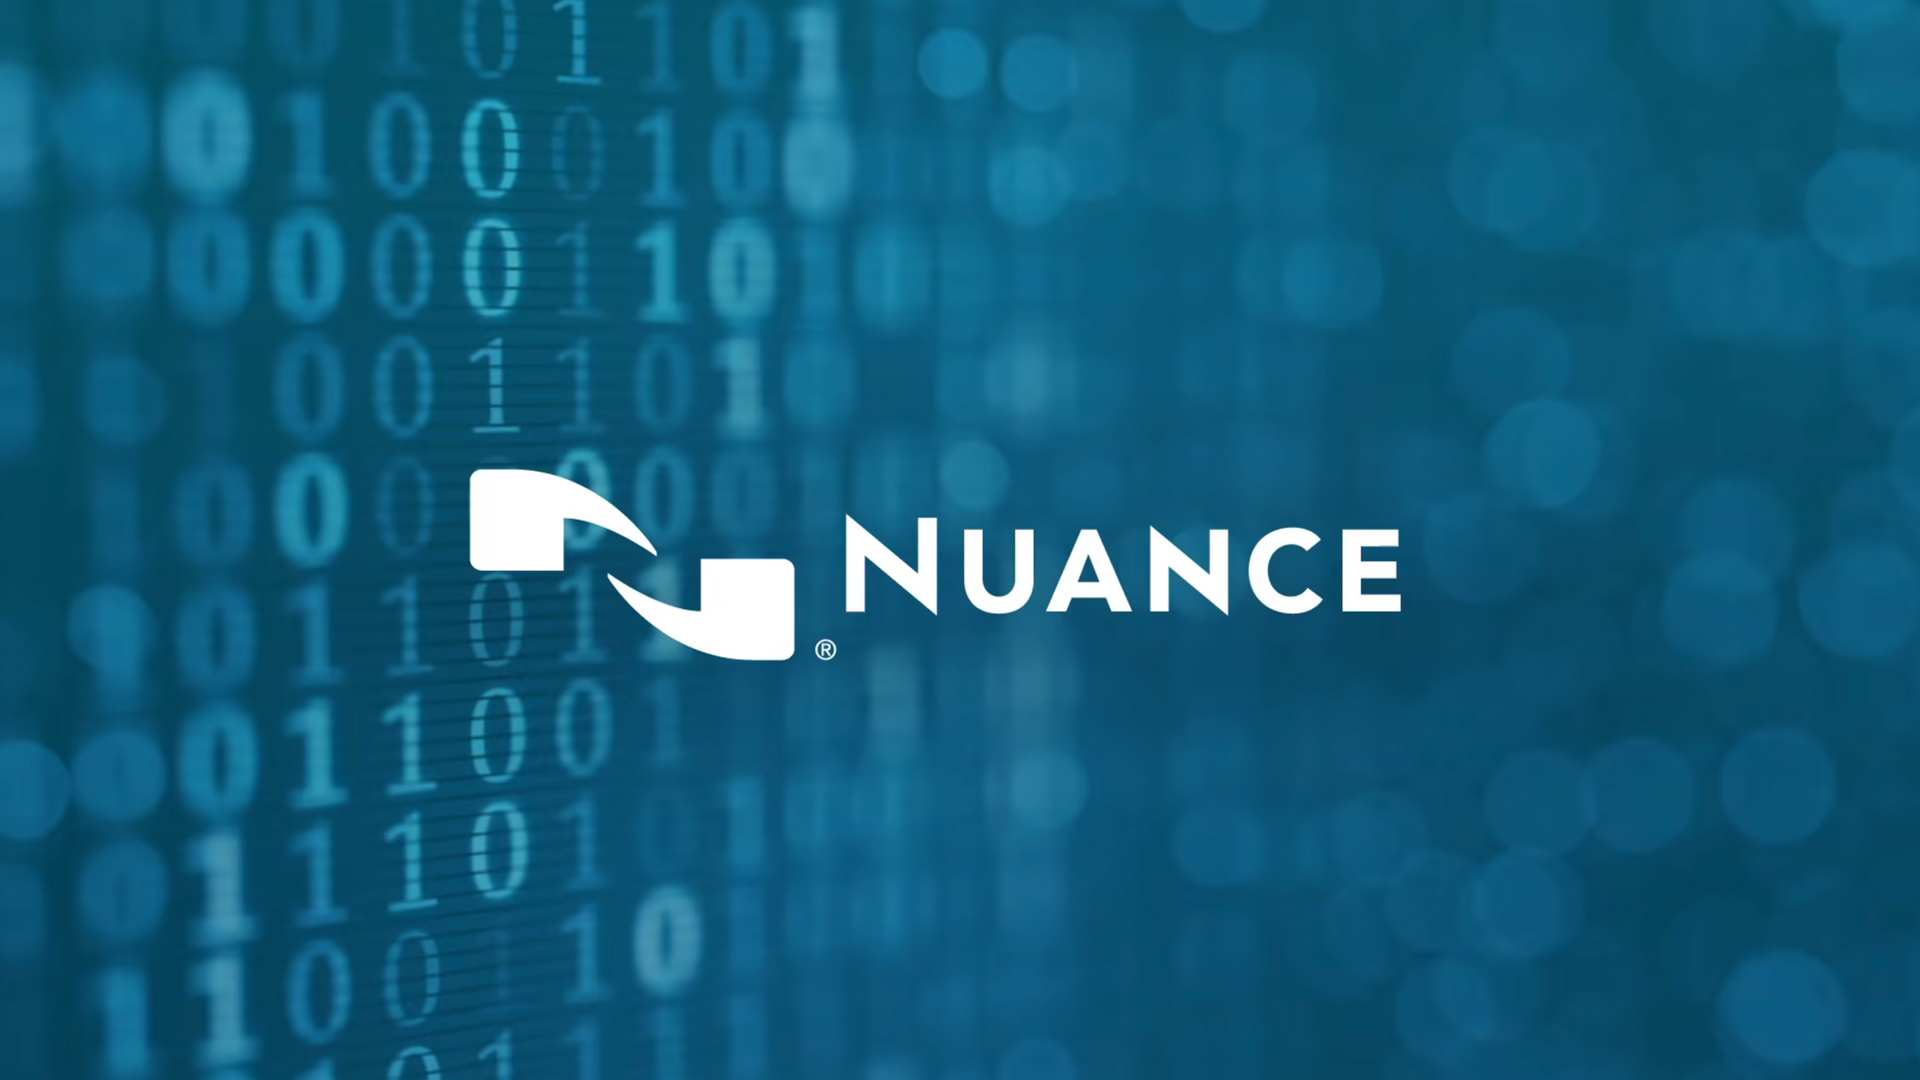 Image with Nuance logo from the opening video promoting the Investor Day event.